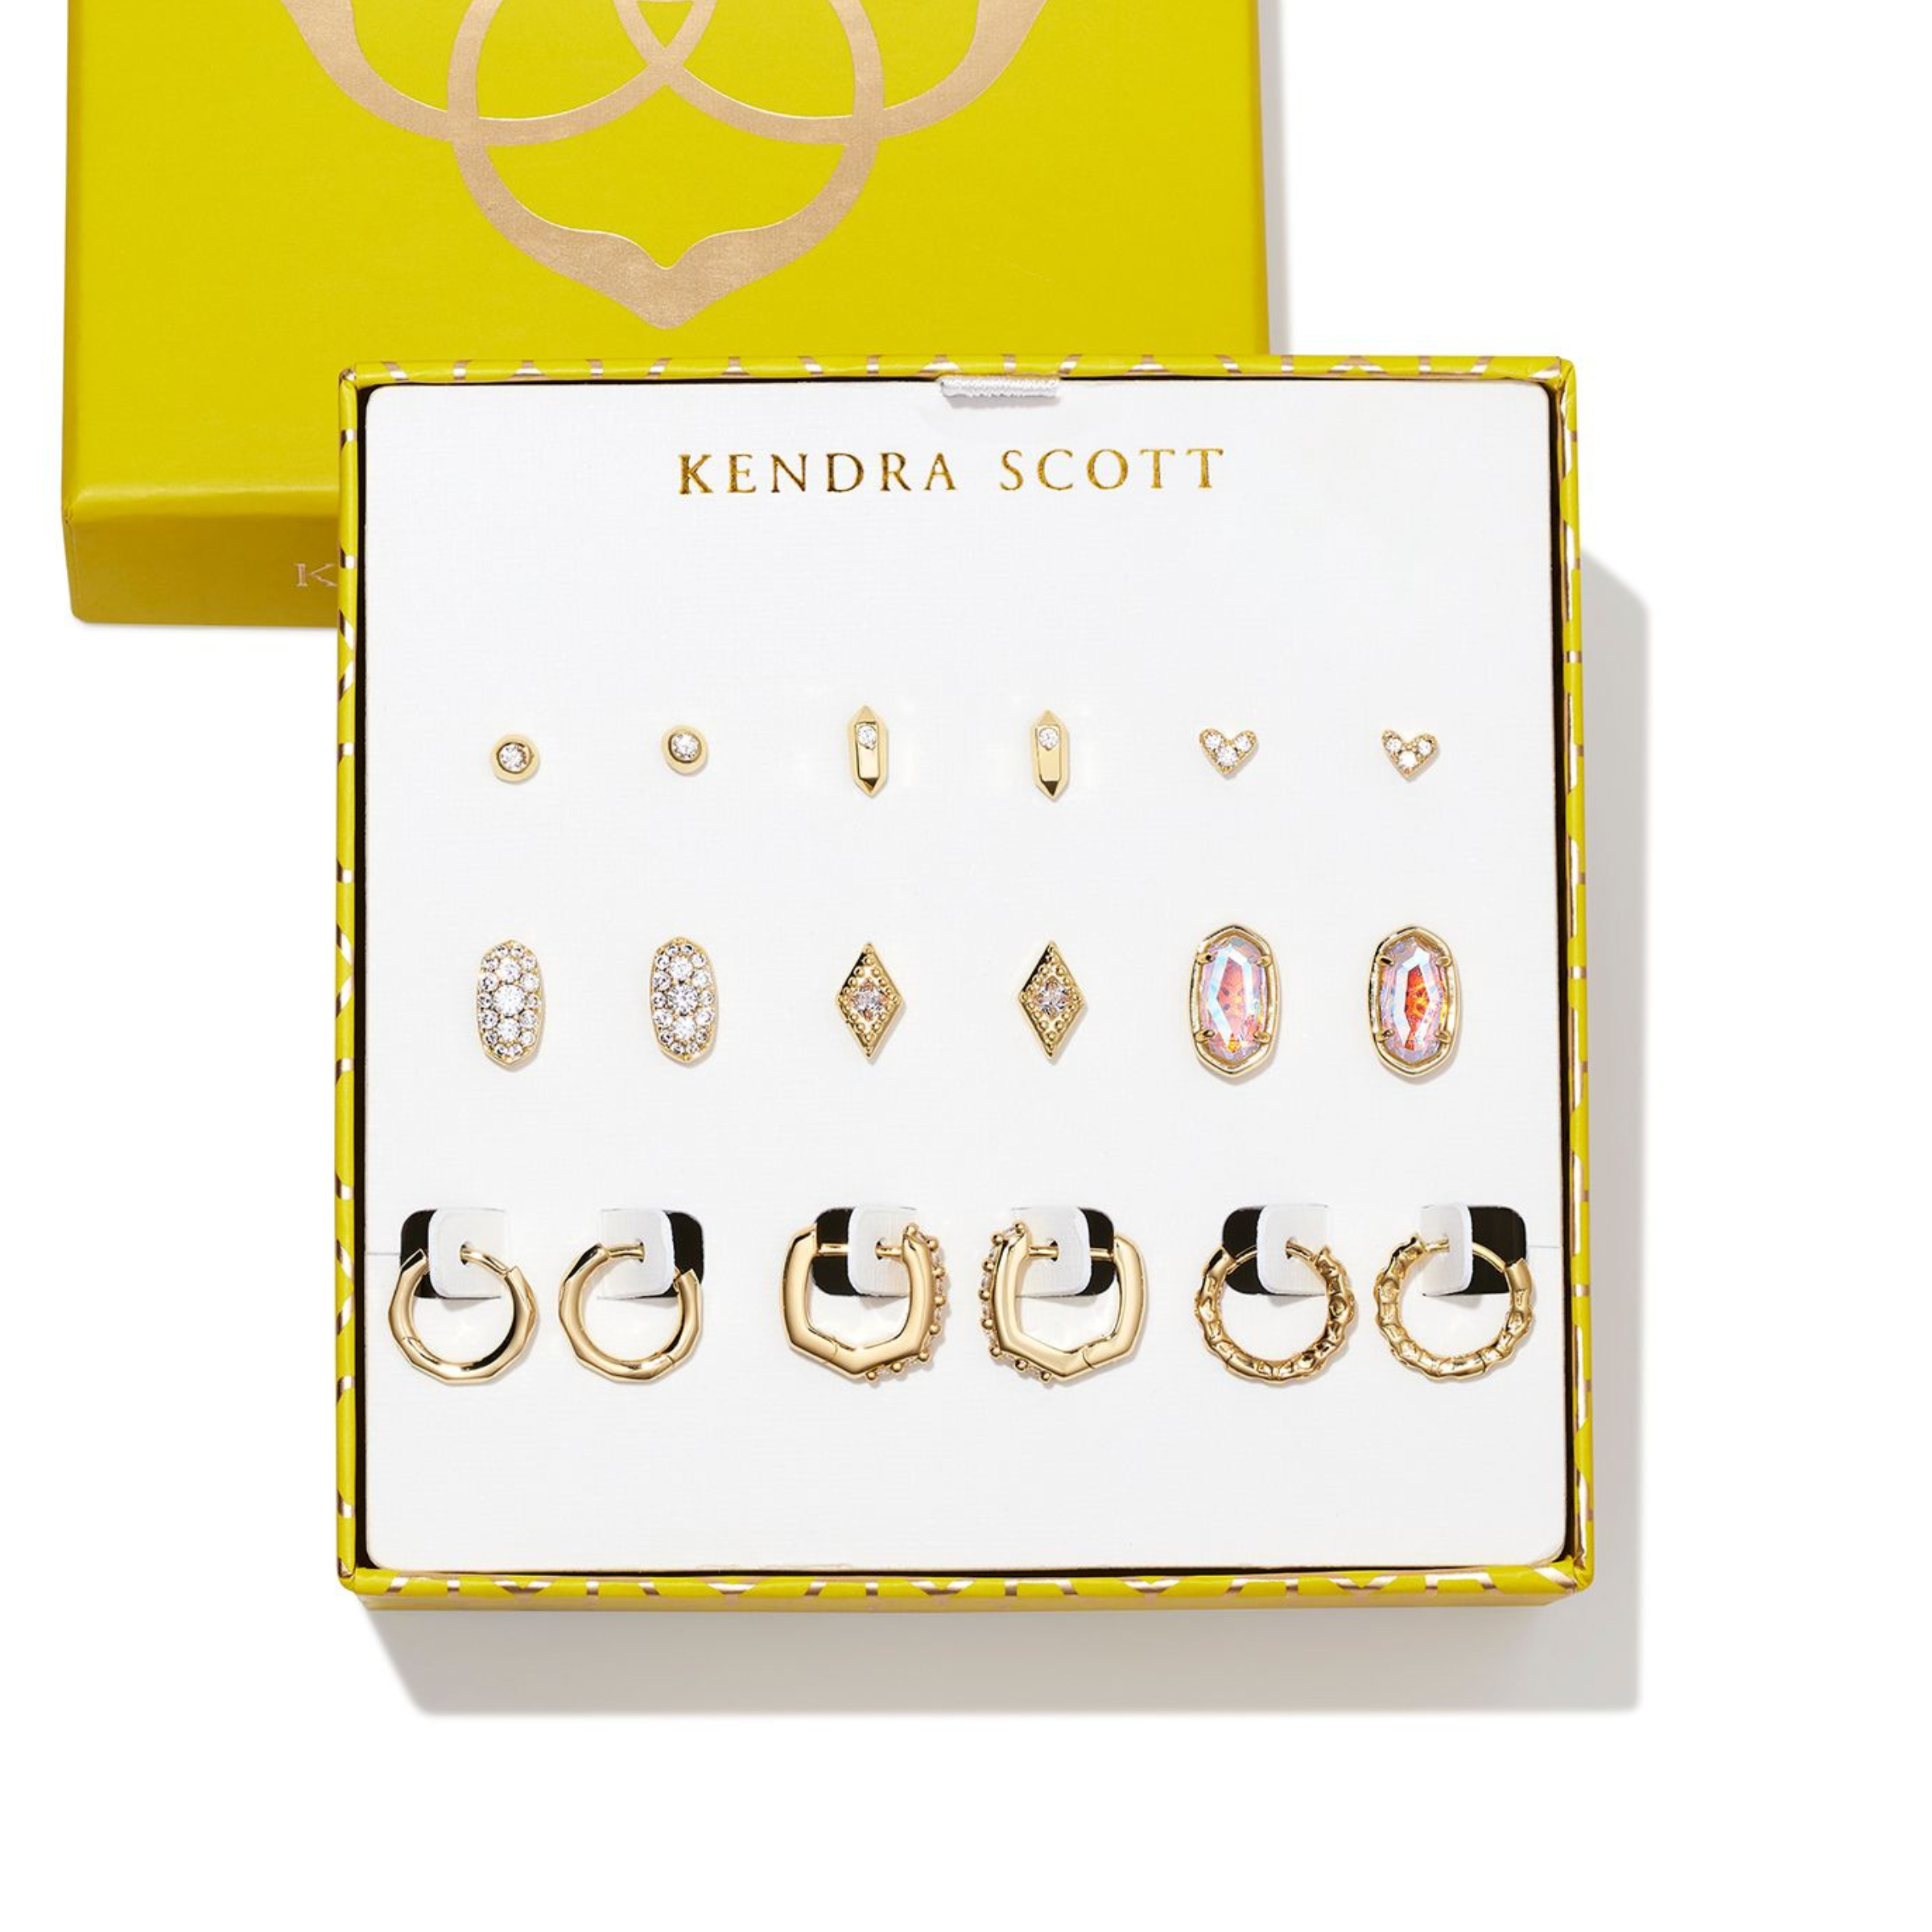 Kendra Scott | Earring Gift Set of 9 in Gold - Giddy Up Glamour Boutique